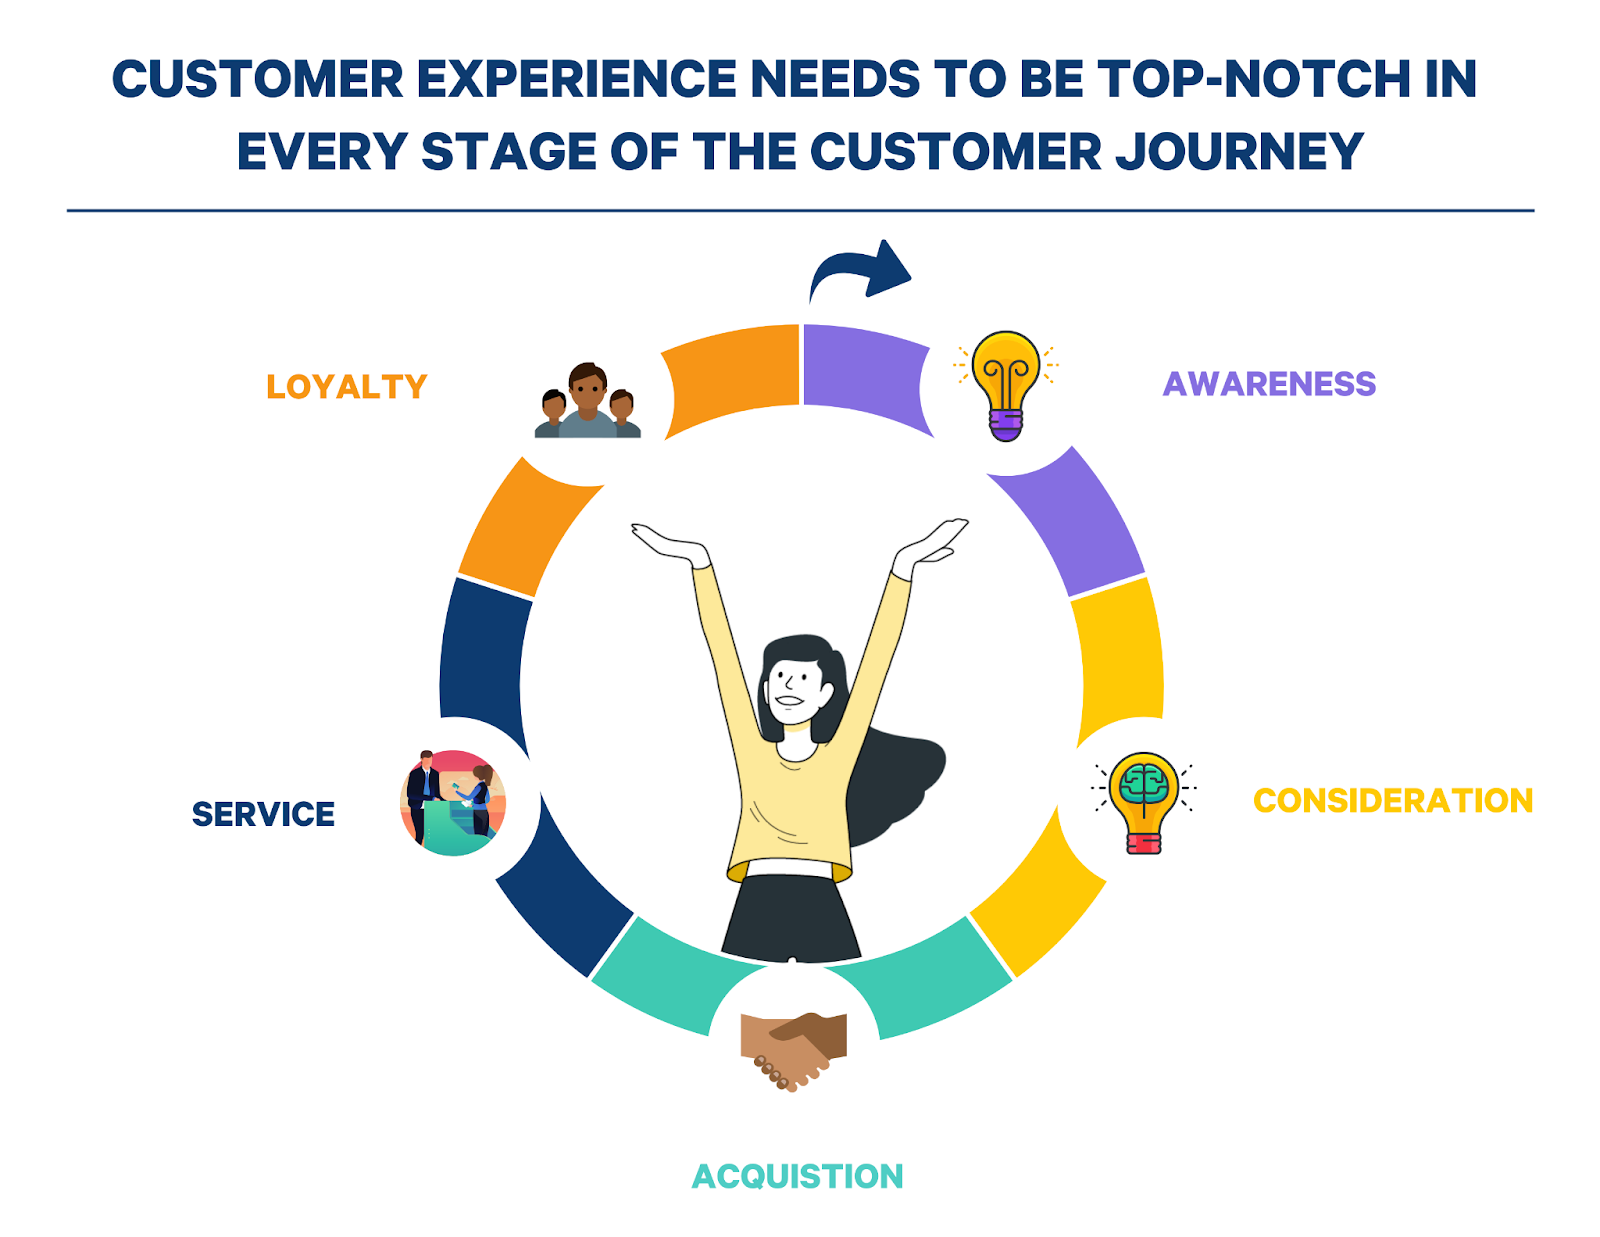 customer experience must be top-notch in every stage of the customer journey: awareness, consideration, acquisition, service and loyalty